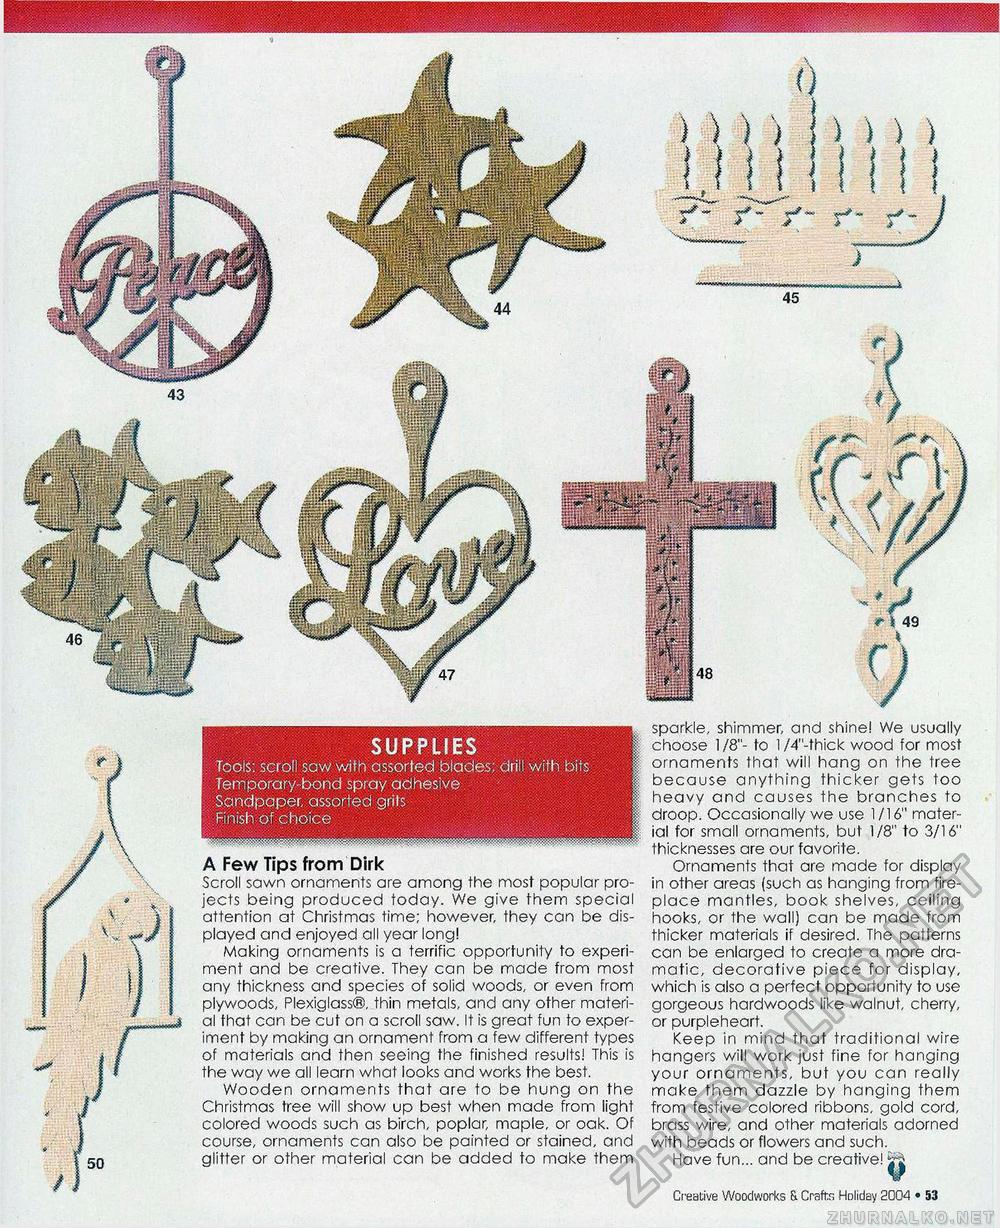 Creative Woodworks  & crafts-103-2004-Holiday,  53